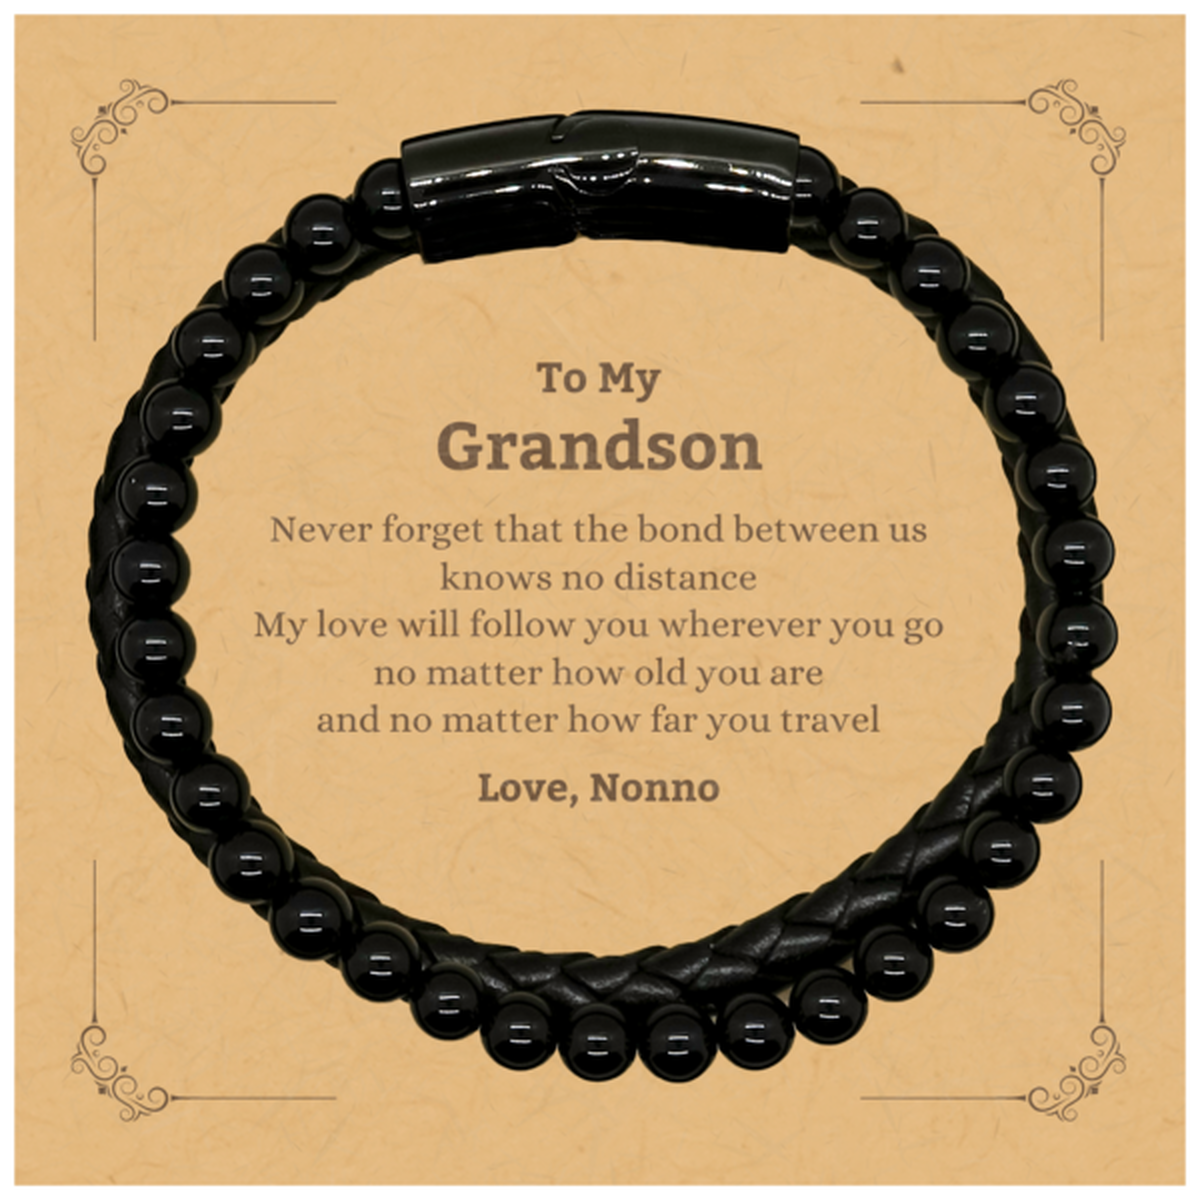 Grandson Birthday Gifts from Nonno, Adjustable Stone Leather Bracelets for Grandson Christmas Graduation Unique Gifts Grandson Never forget that the bond between us knows no distance. Love, Nonno